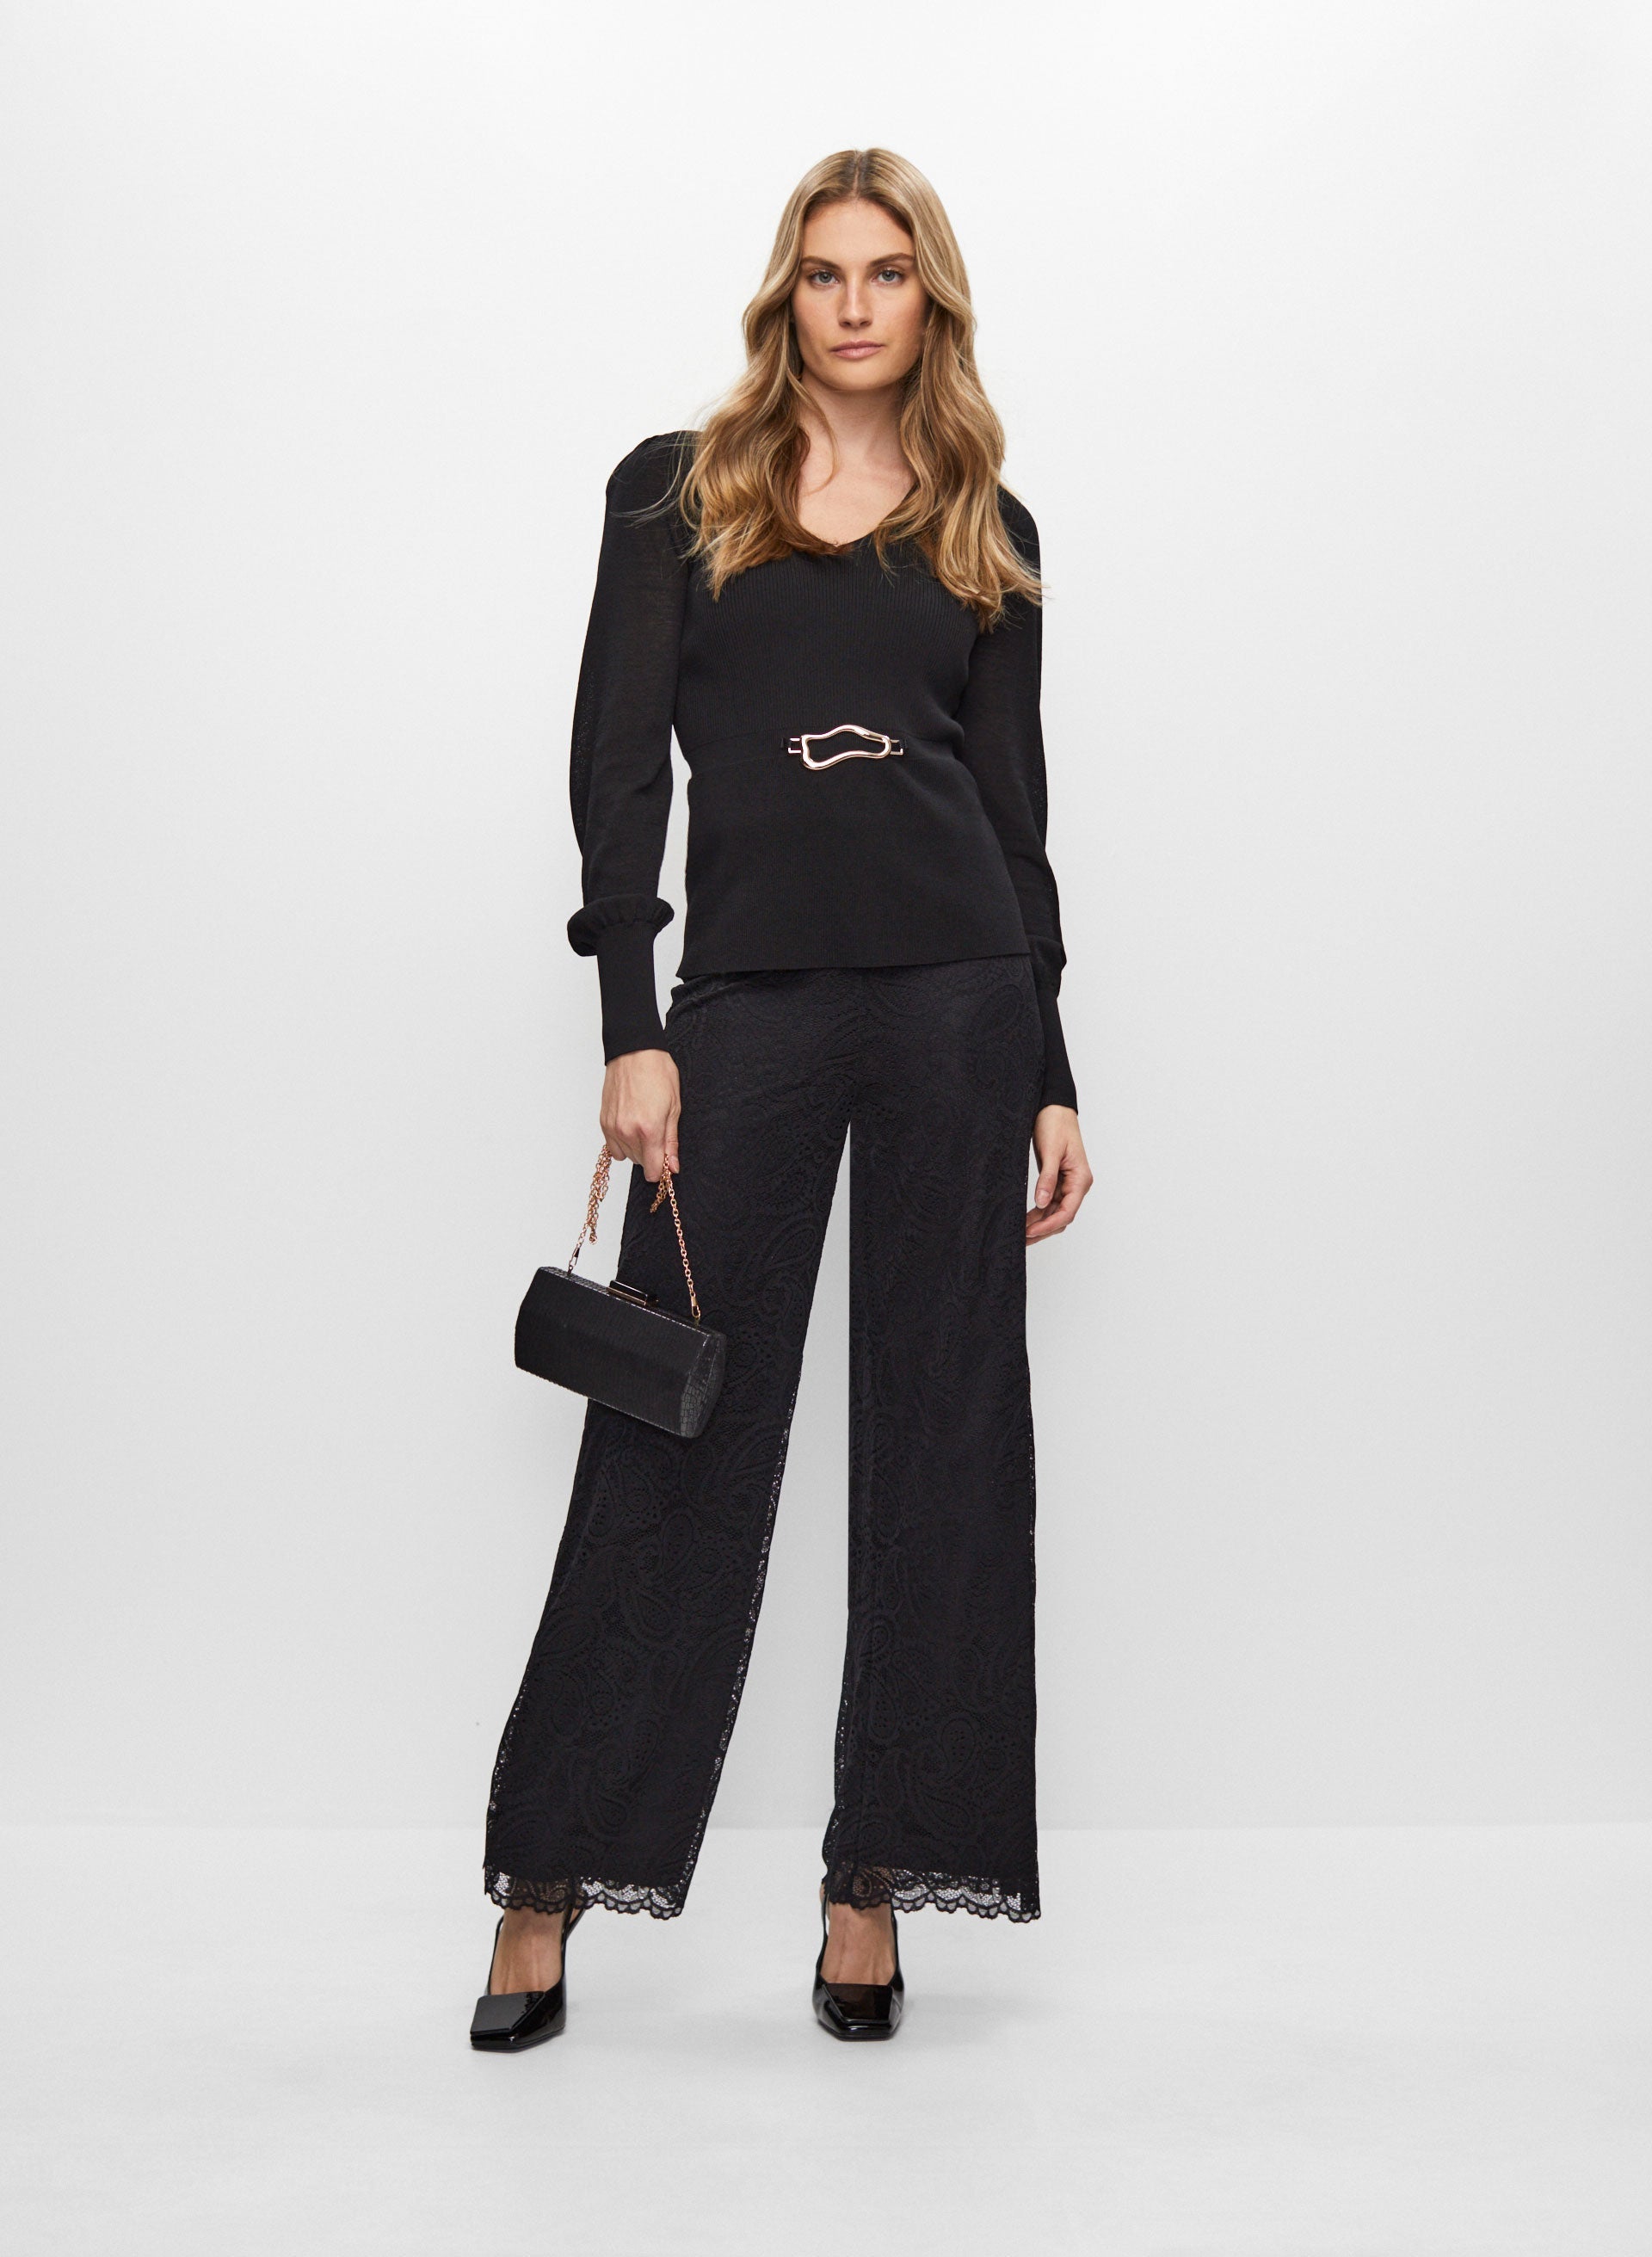 Belted Peplum Top & Lace Pants